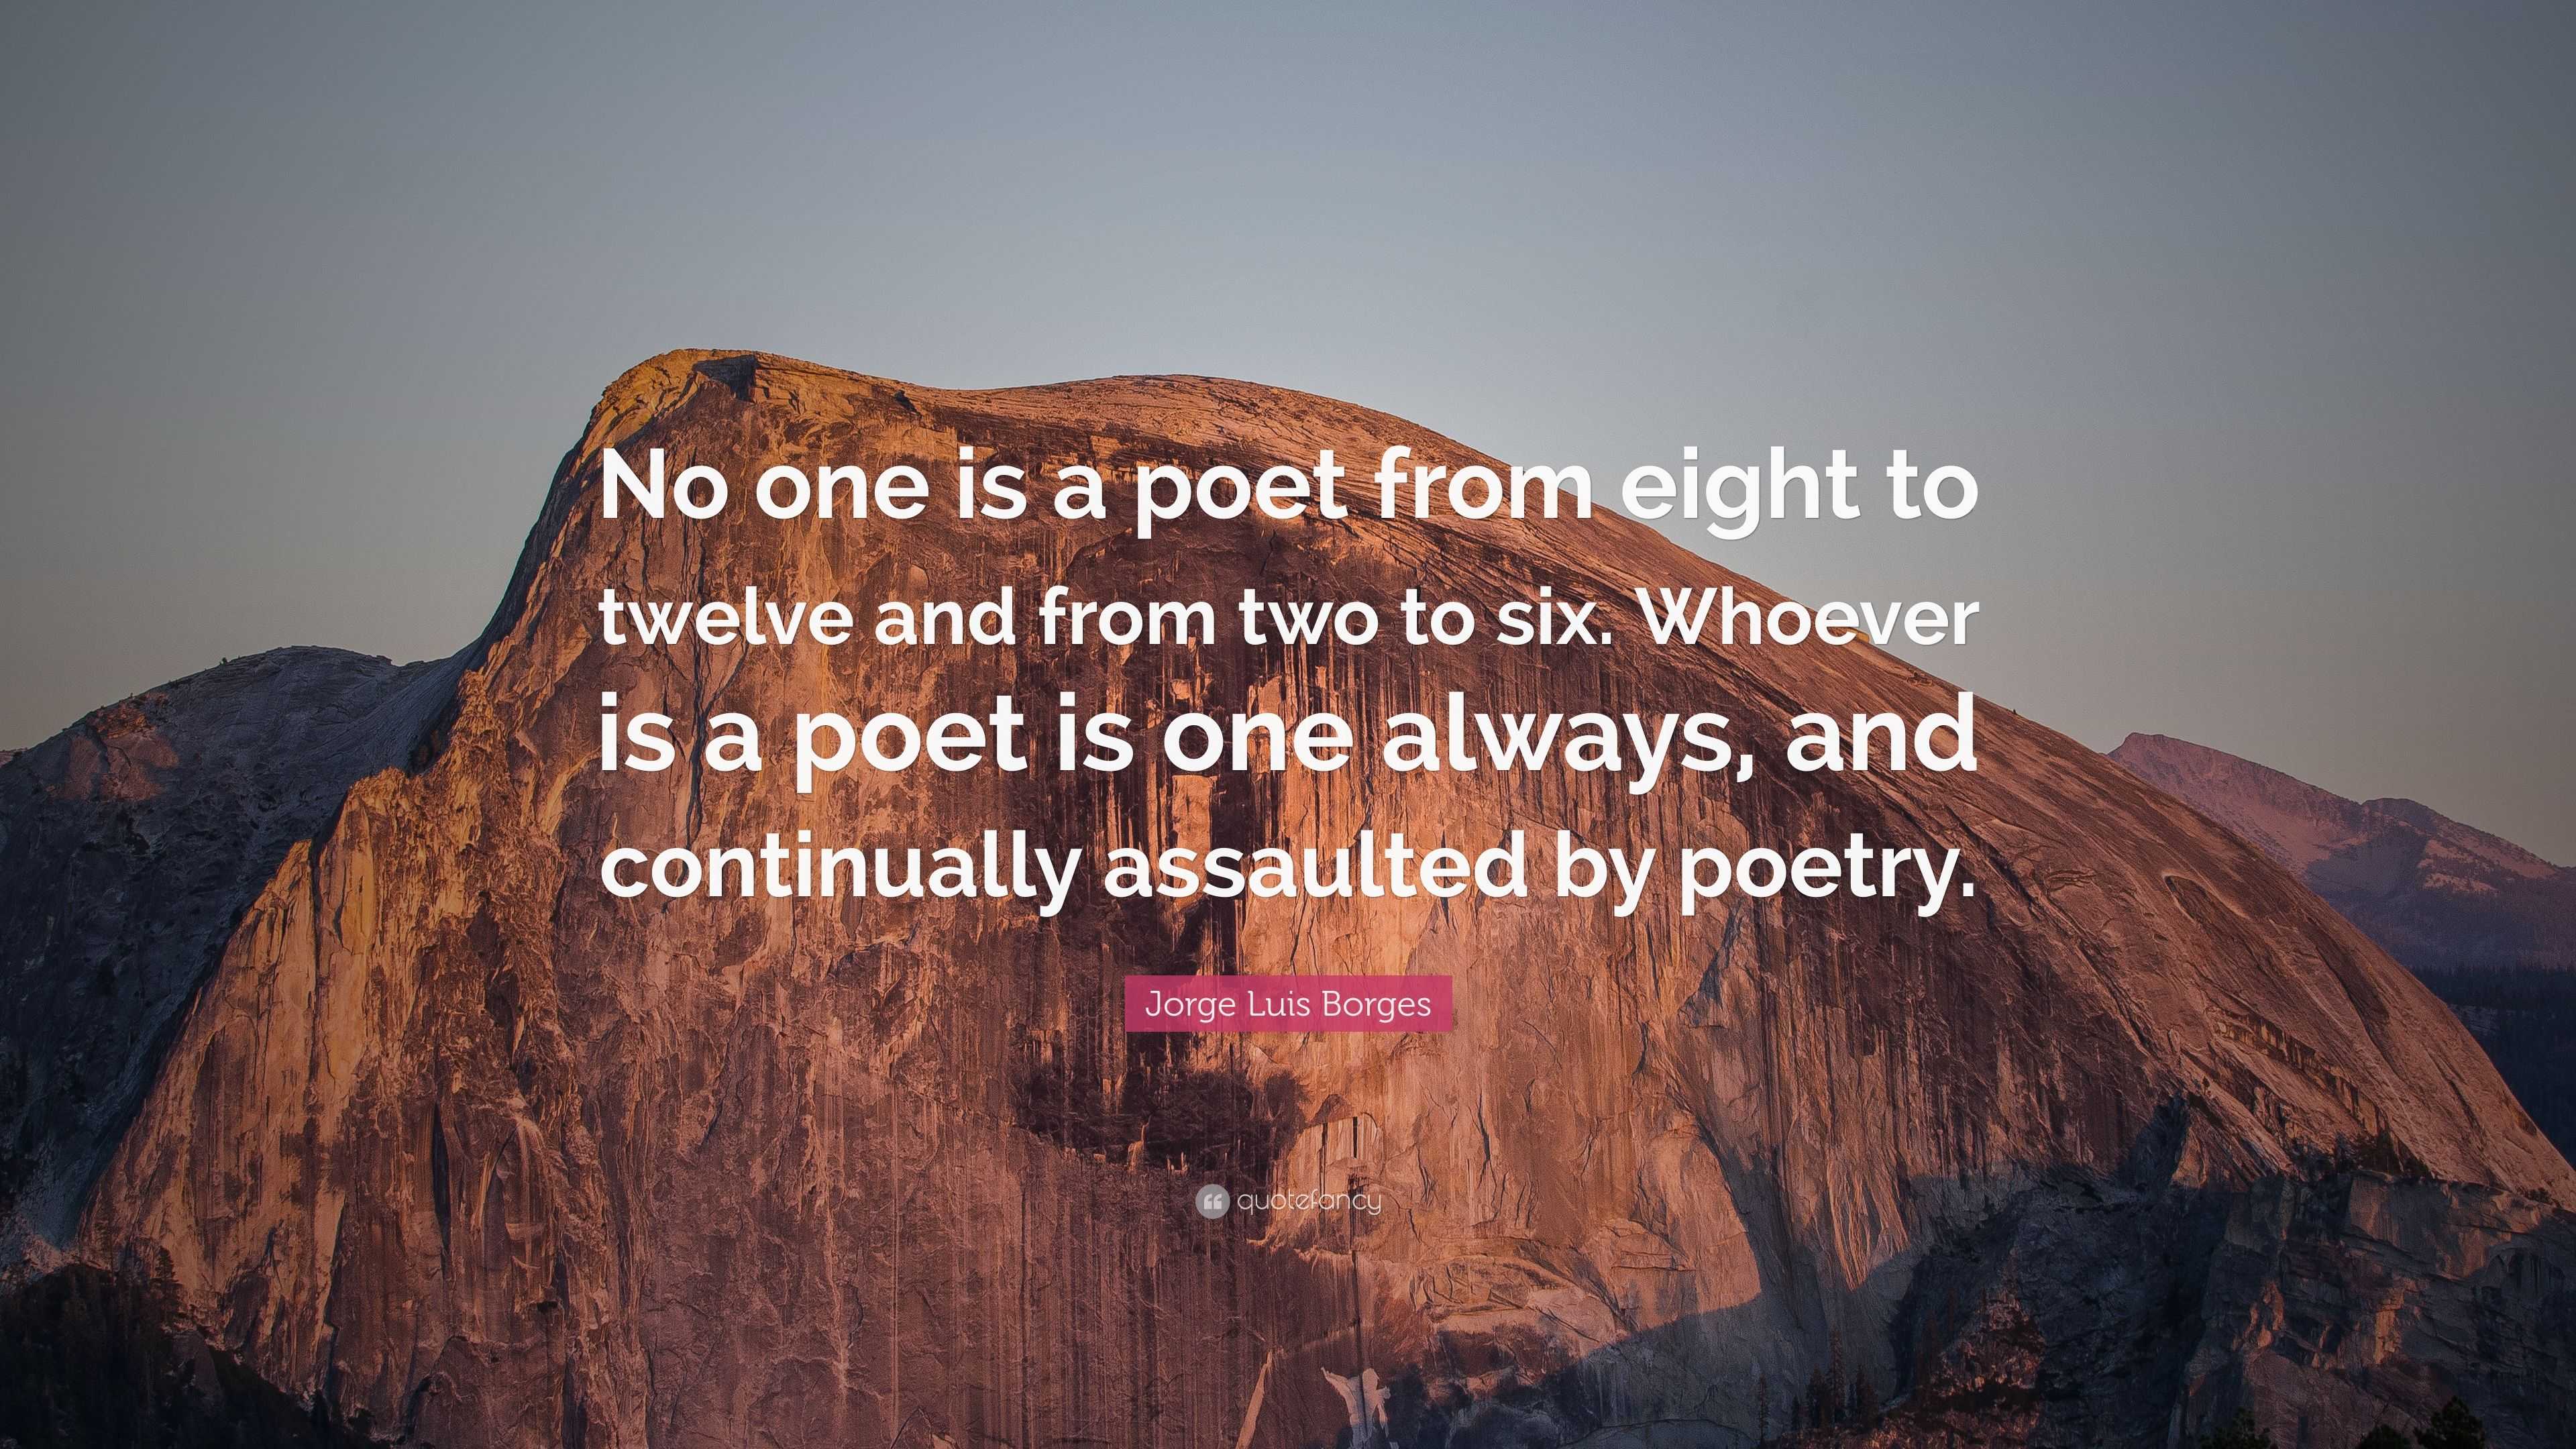 Jorge Luis Borges Quote: “No one is a poet from eight to twelve and ...